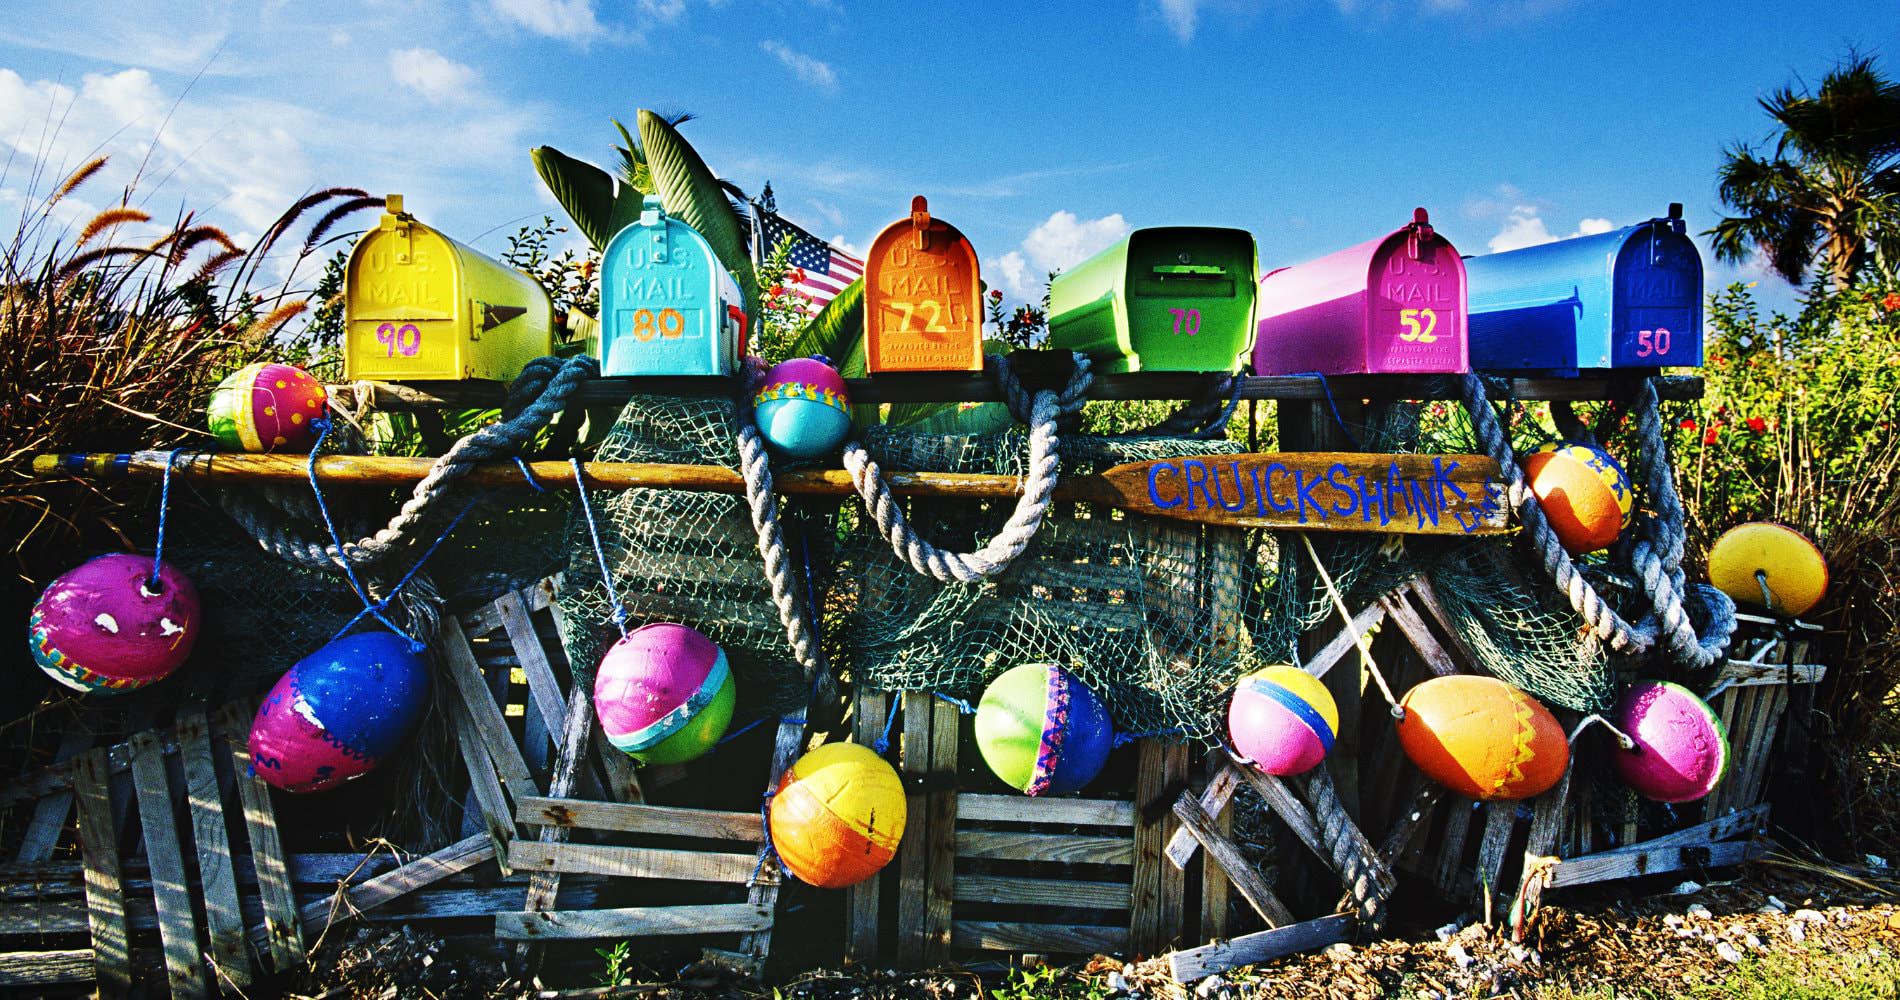 Multi-colored numbered mailboxes with netting and rope and colored balls with blue sky in background